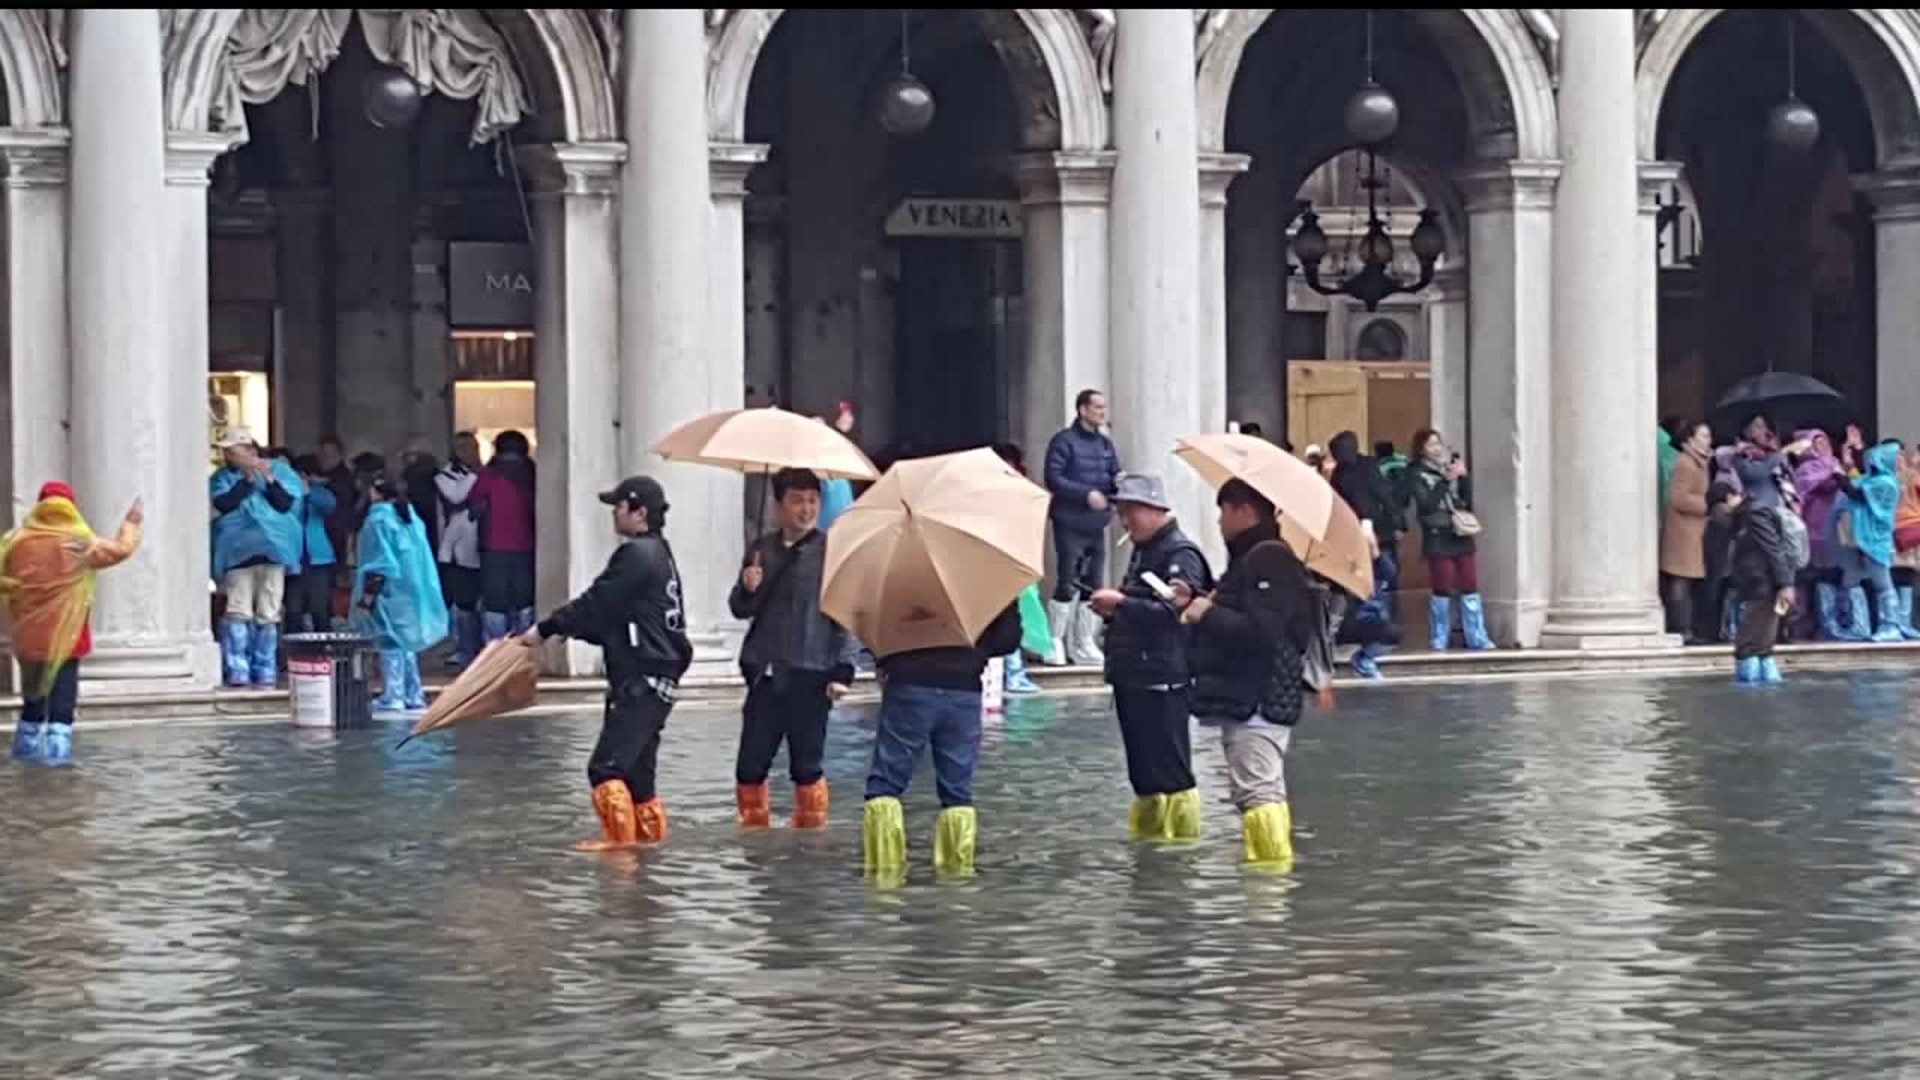 Flooding in Venice, Italy